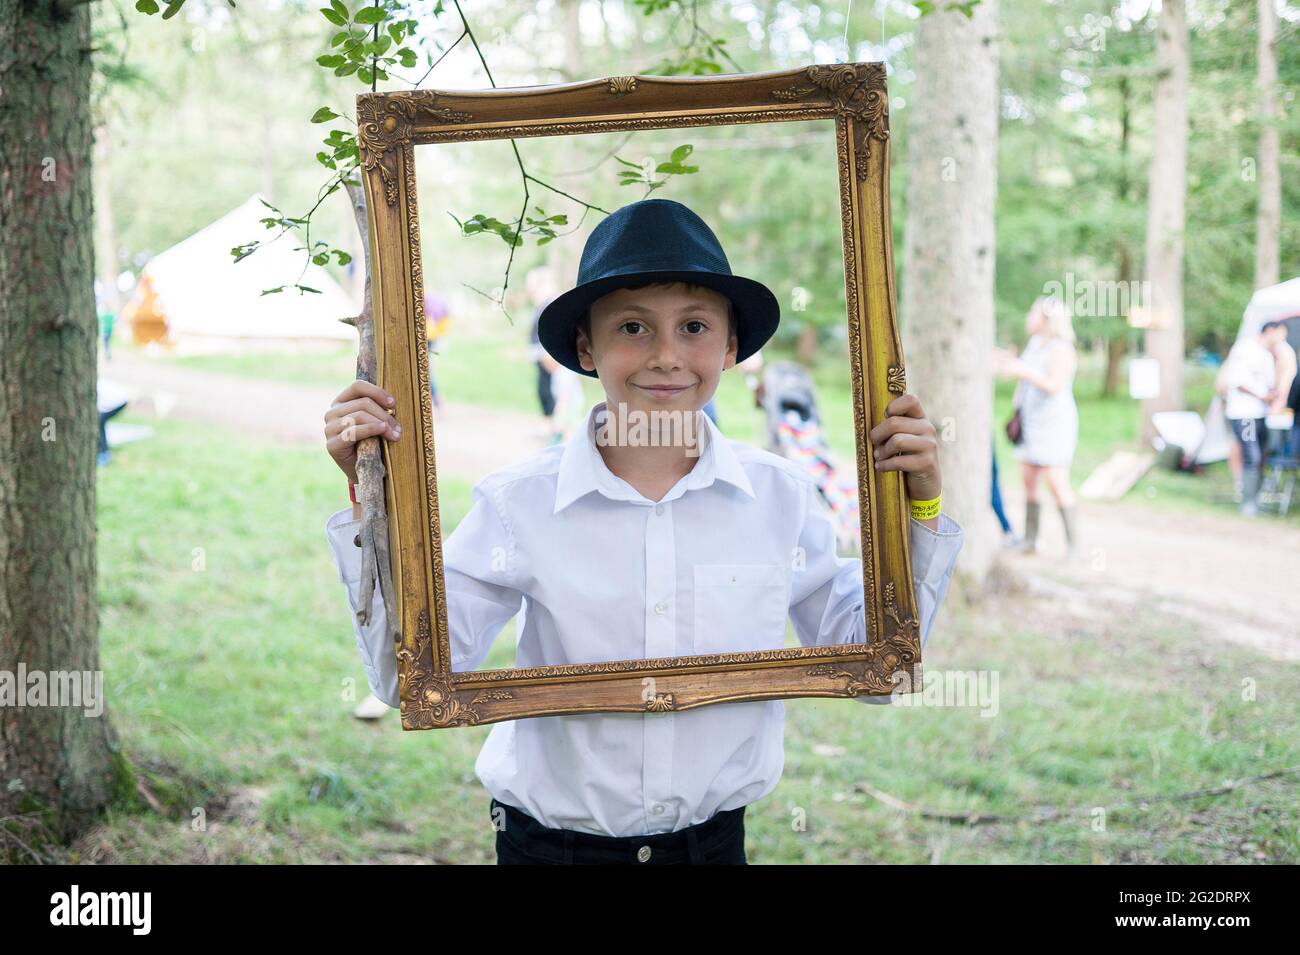 A young boy holds a picture frame at a festival in the forest Stock Photo